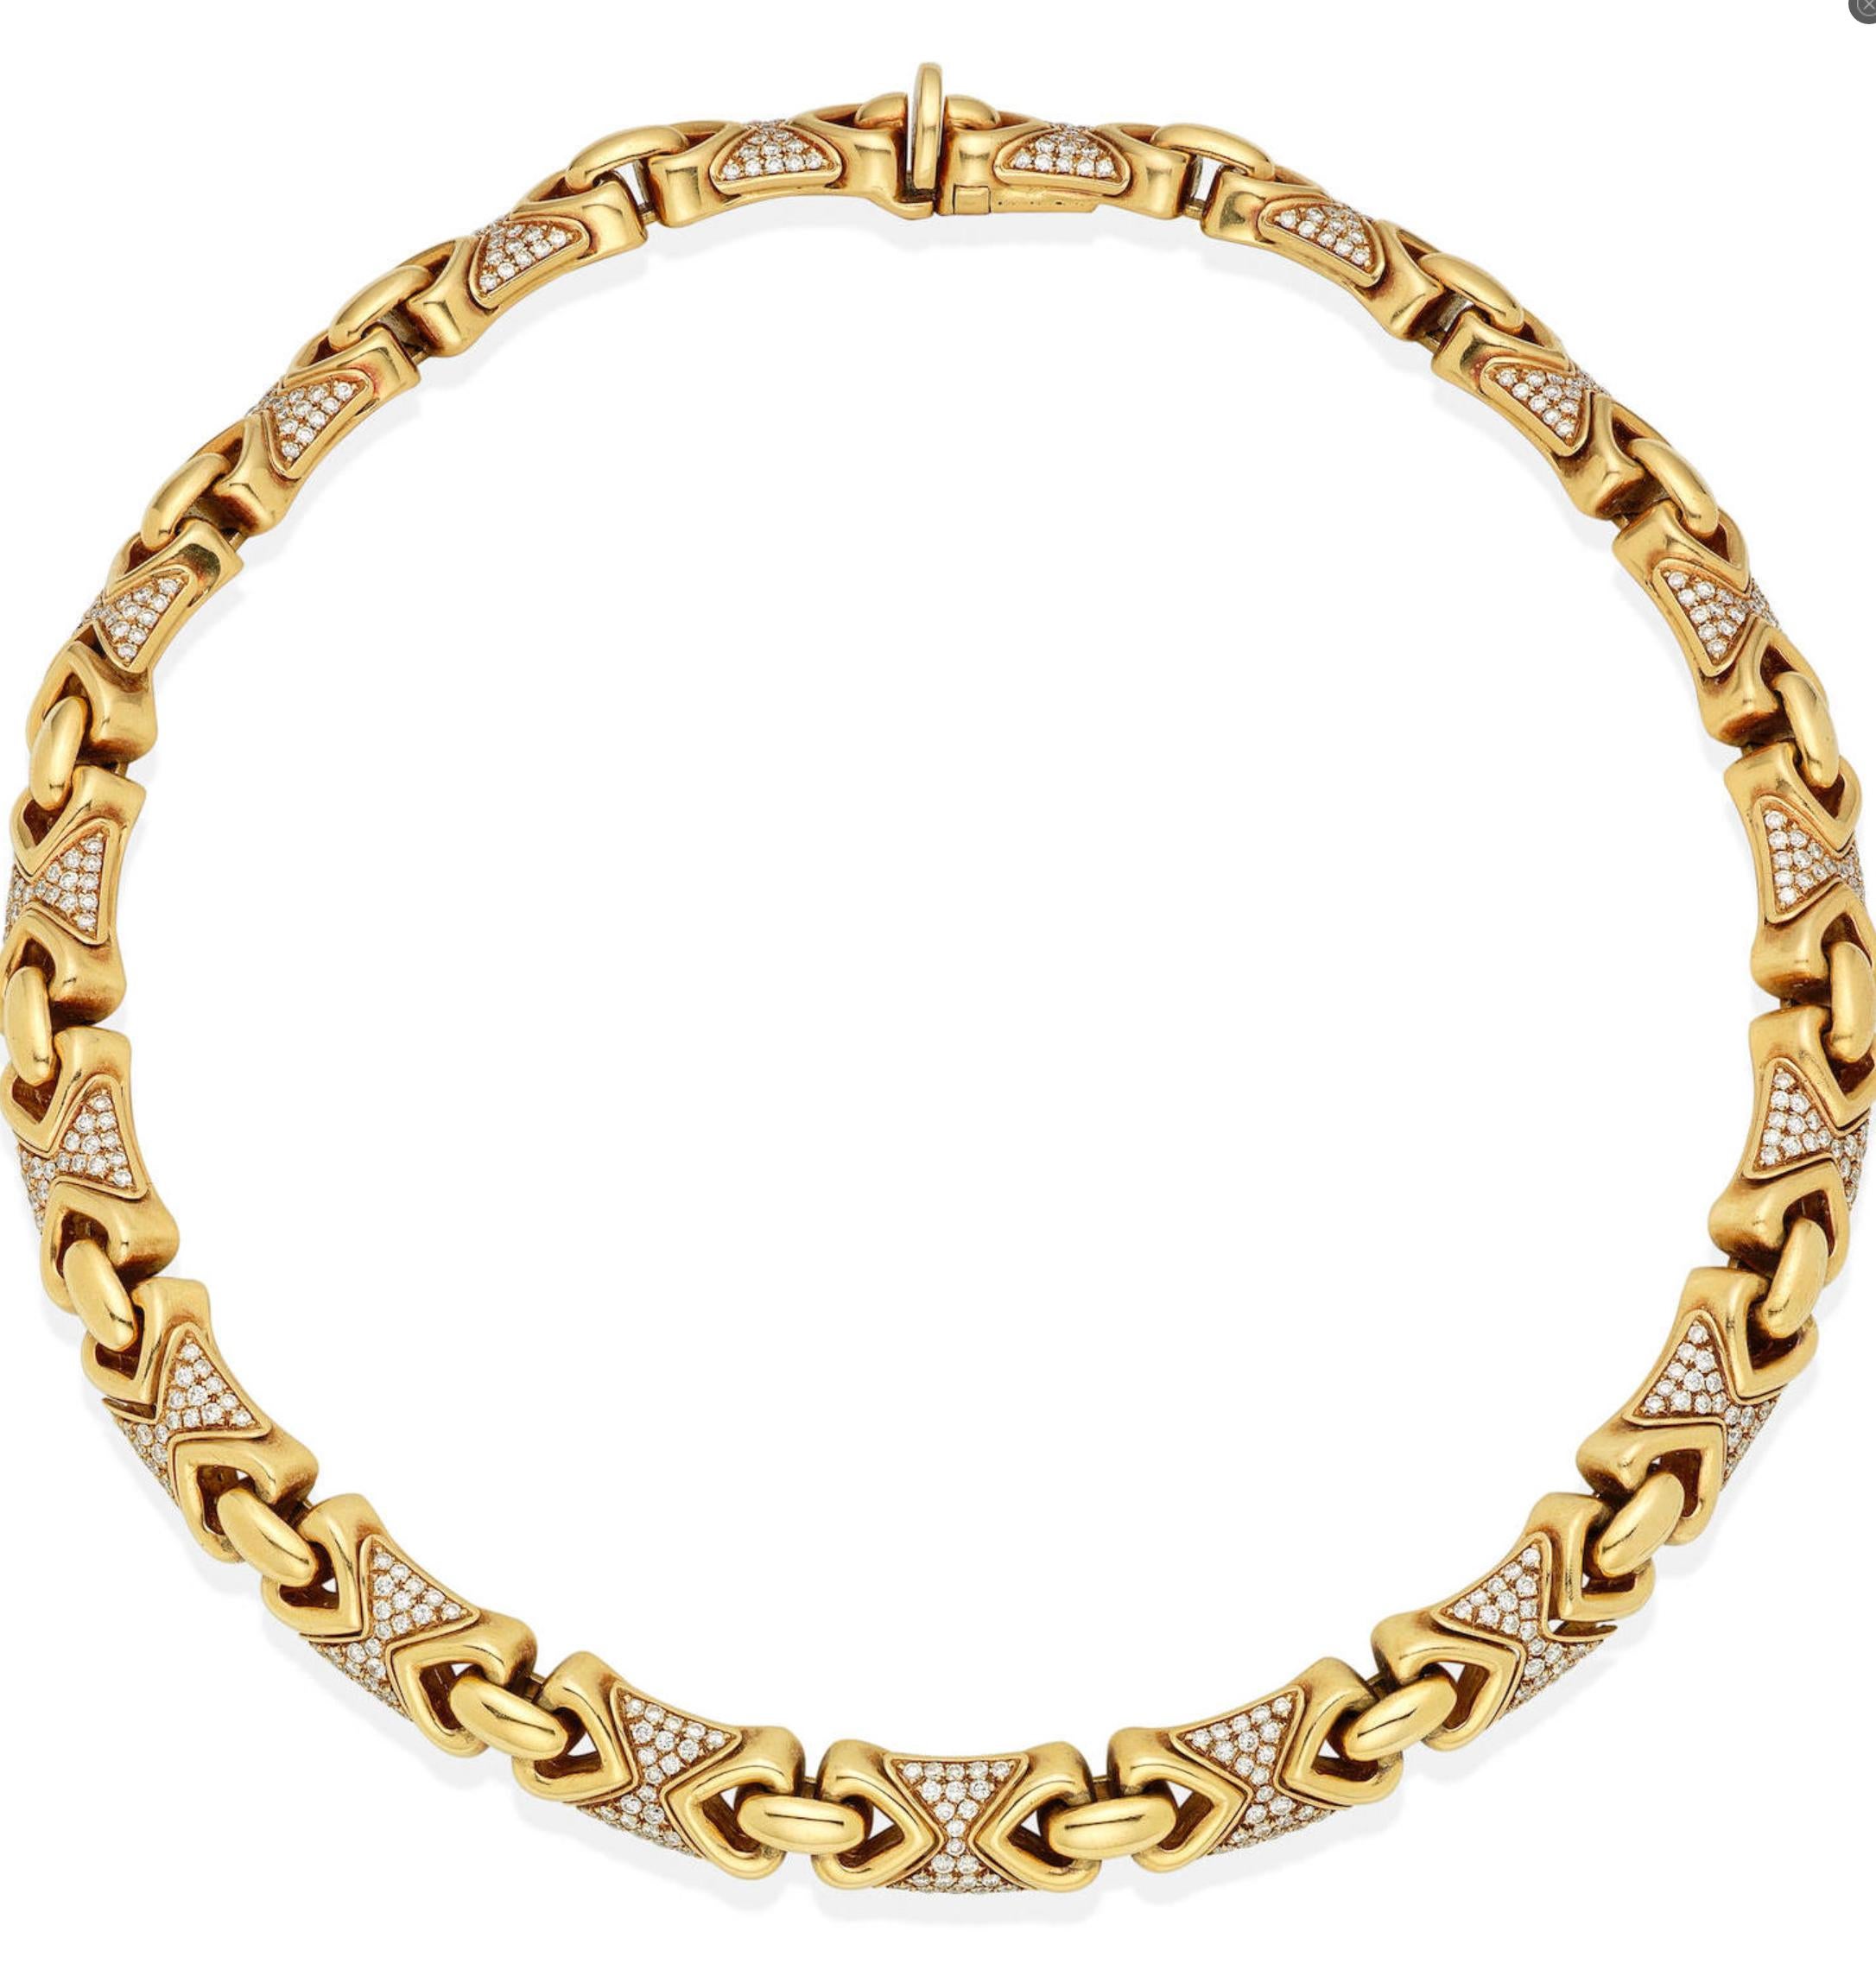 A diamond set 'Doppio Cuore' 18 karat yellow gold necklace by Bulgari designed as a series of modular-links pave'-set with Round Brilliant cut Diamonds weighing approximately 4.40 carats with alternating triangular-shaped polished links.  The